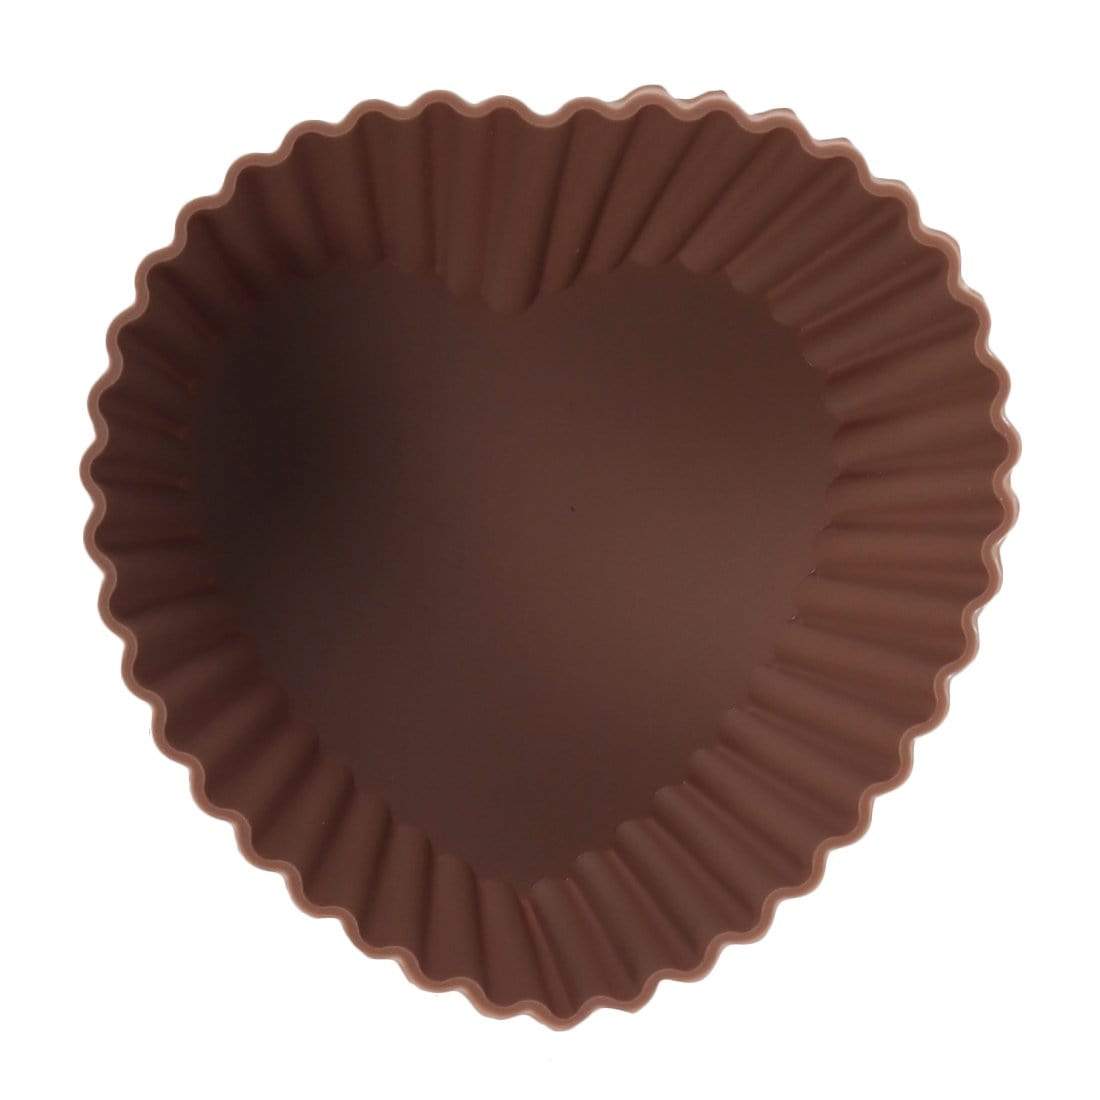 3D Silicone Silicone Heart Cupcake Mold Set For Heart Round Cakes, Chocolate,  Brownie, Mousse, And Dessert Pan Perfect For Cake Decorating And Dish Tools  From Margueriter, $10.75